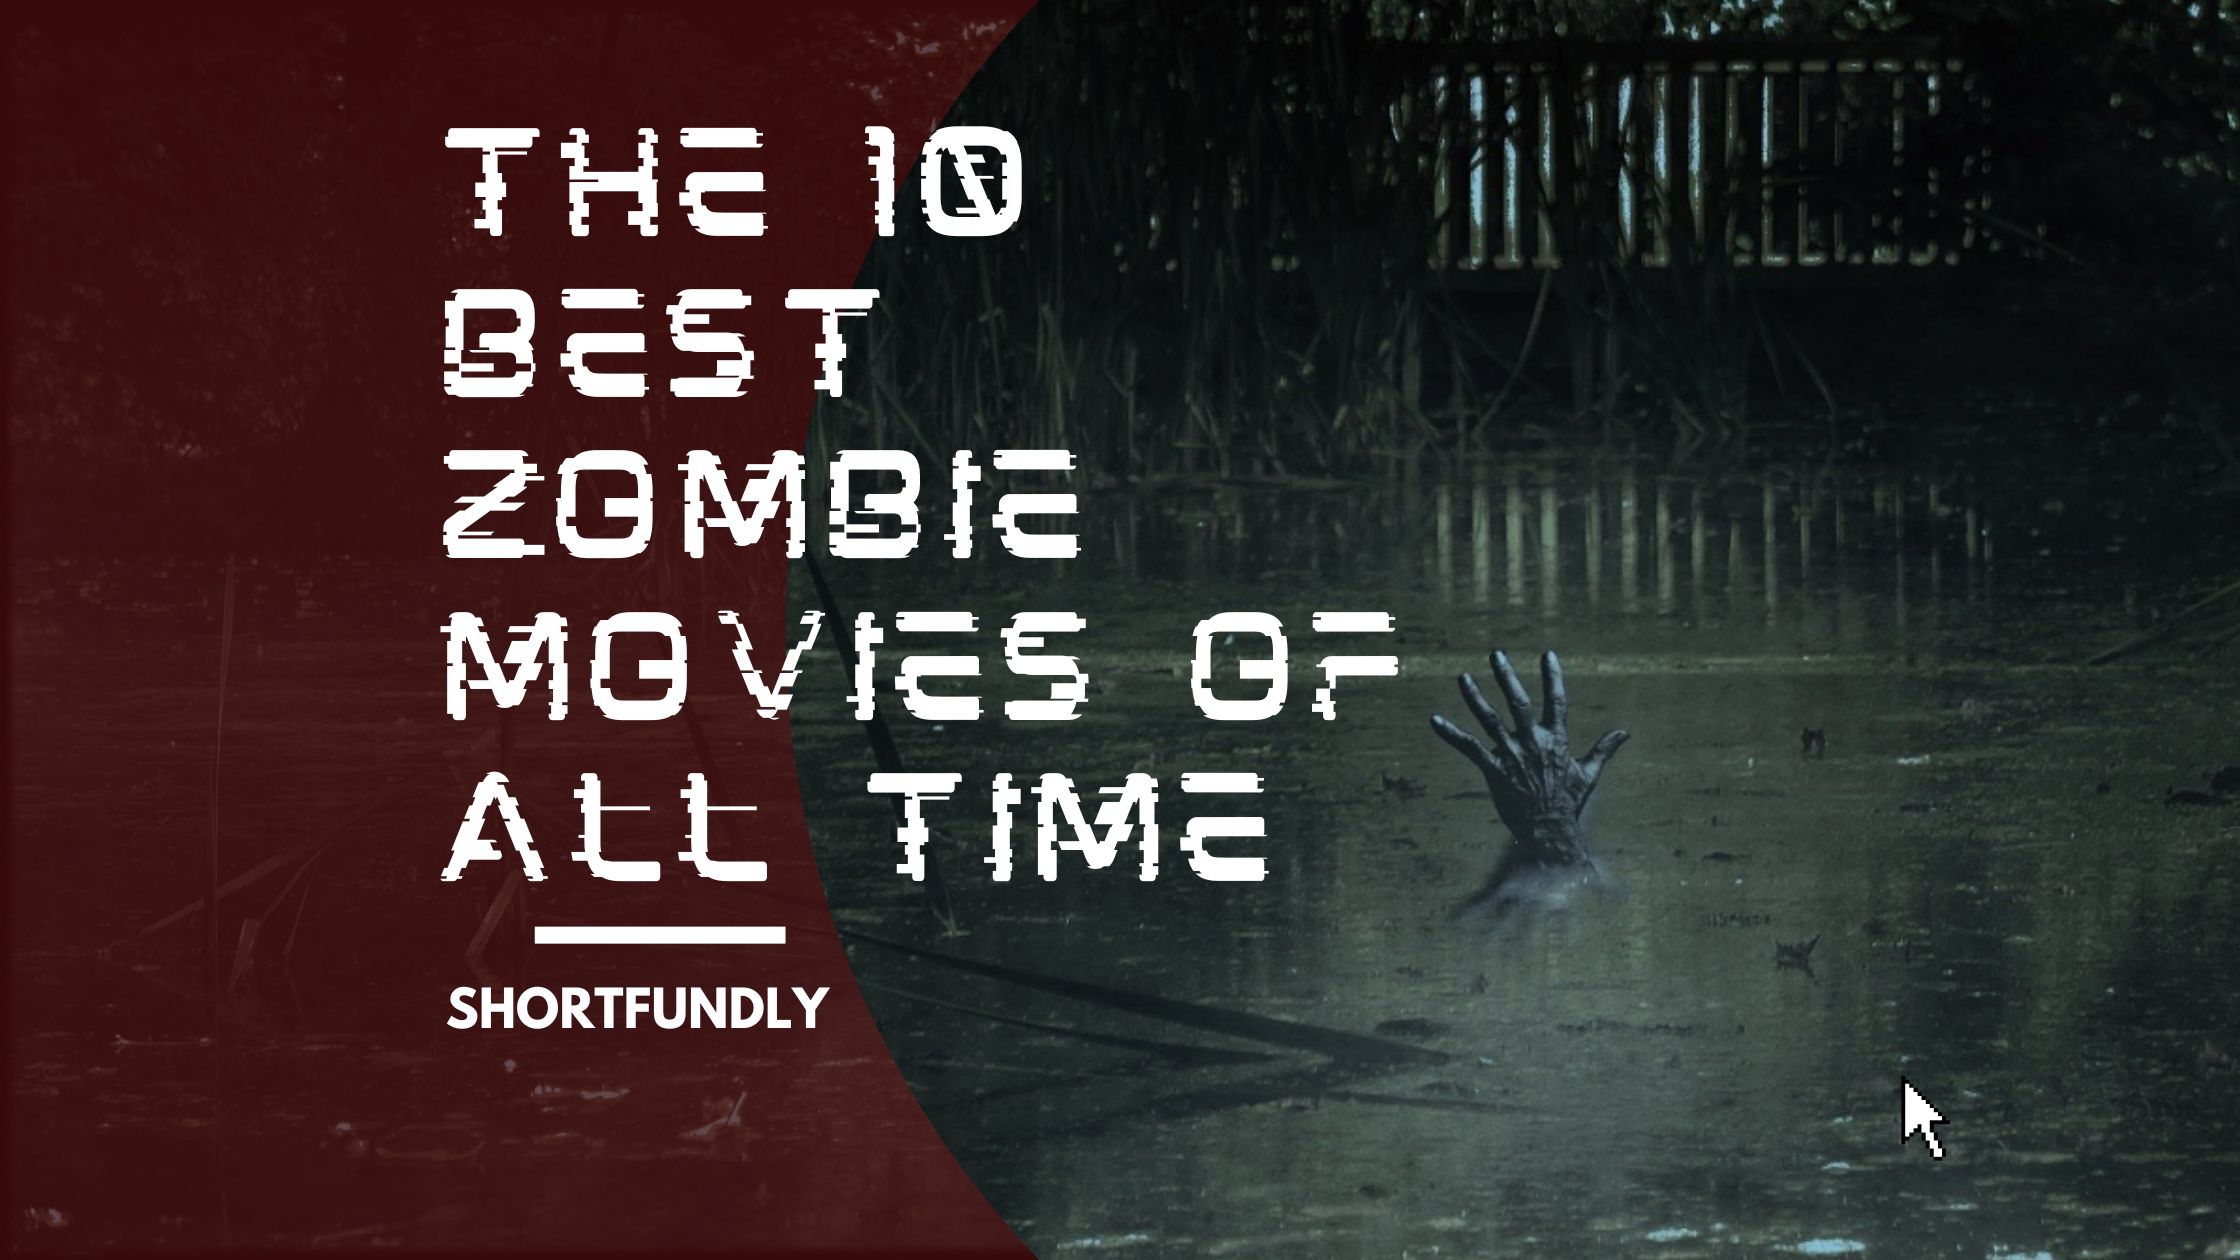 10 Best Zombie Movies of All Time